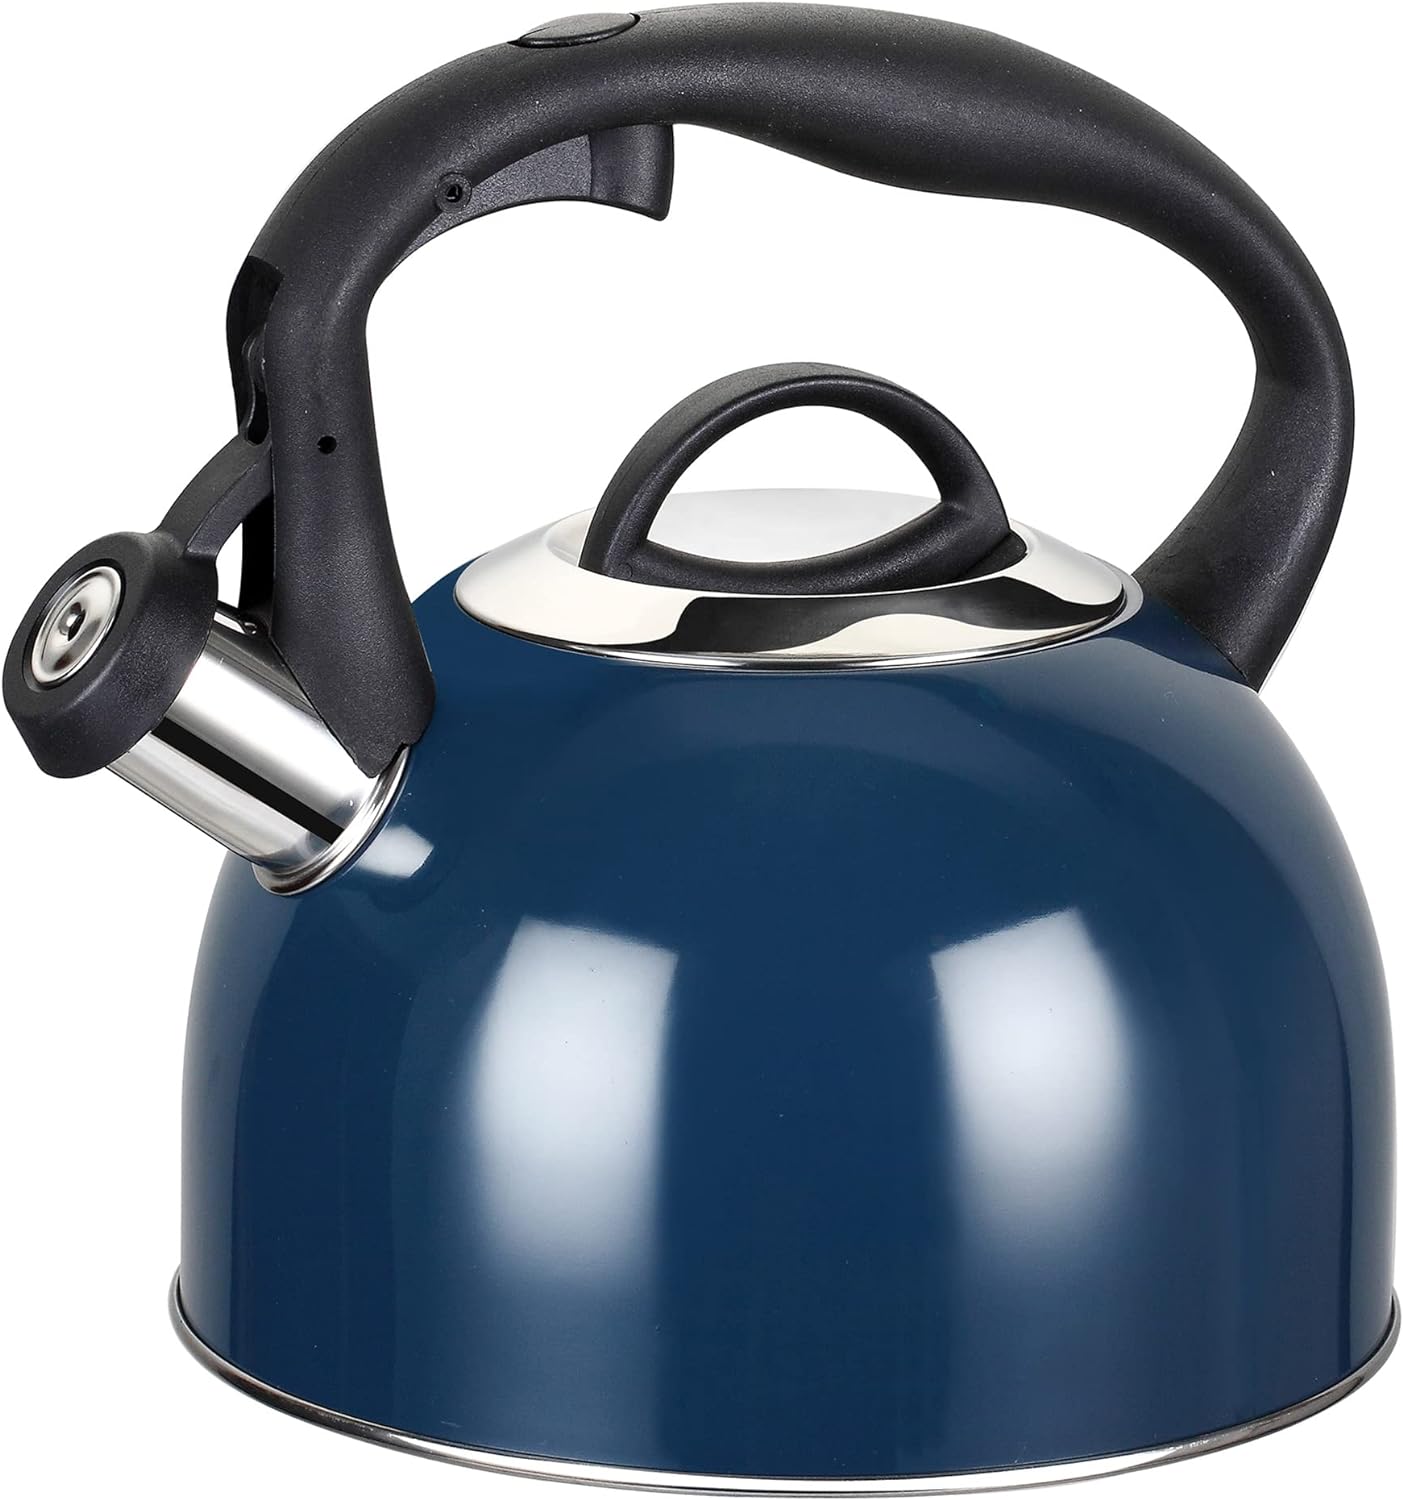 MAISCHOU Stove Top Whistling Kettle 2.5L Stainless Steel (Navy Blue)-1278